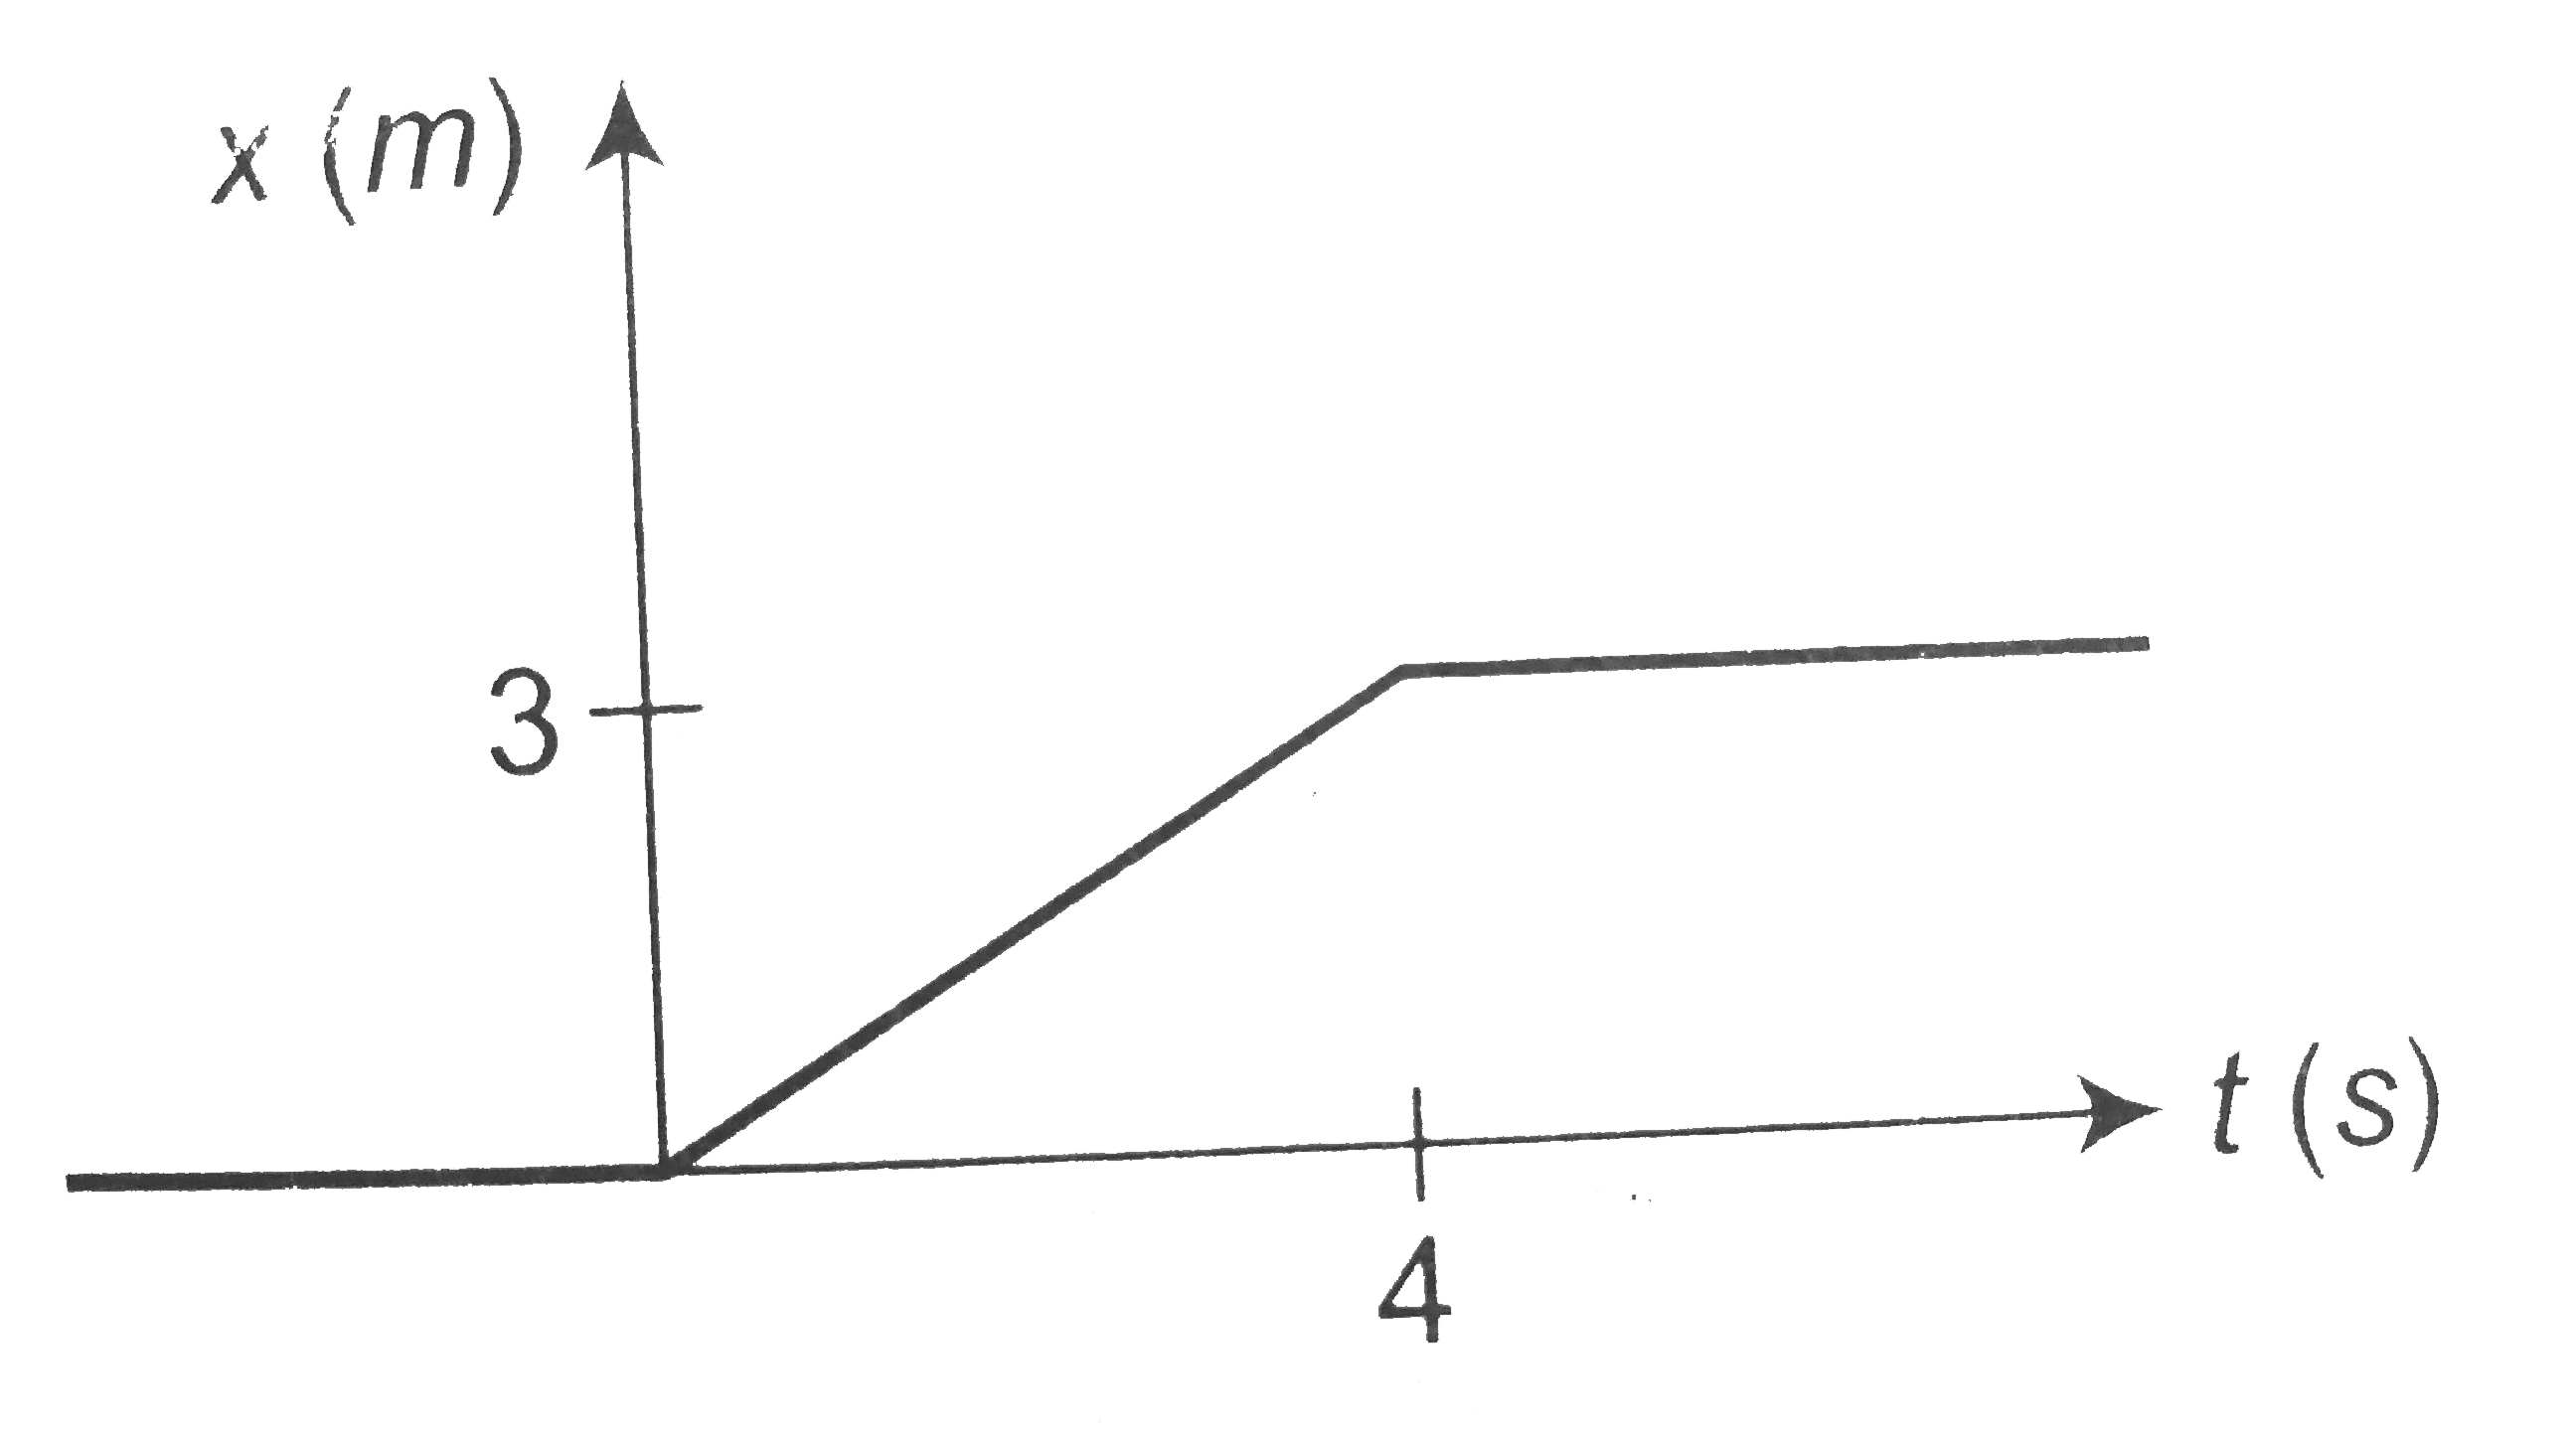 Figure shows the position-time graph of a particle of mass 4kg. Let the force on the particle for tlt0 , 0lttlt,4s , tgt4s be F(1) , F(2) and F(3) respectively. Then